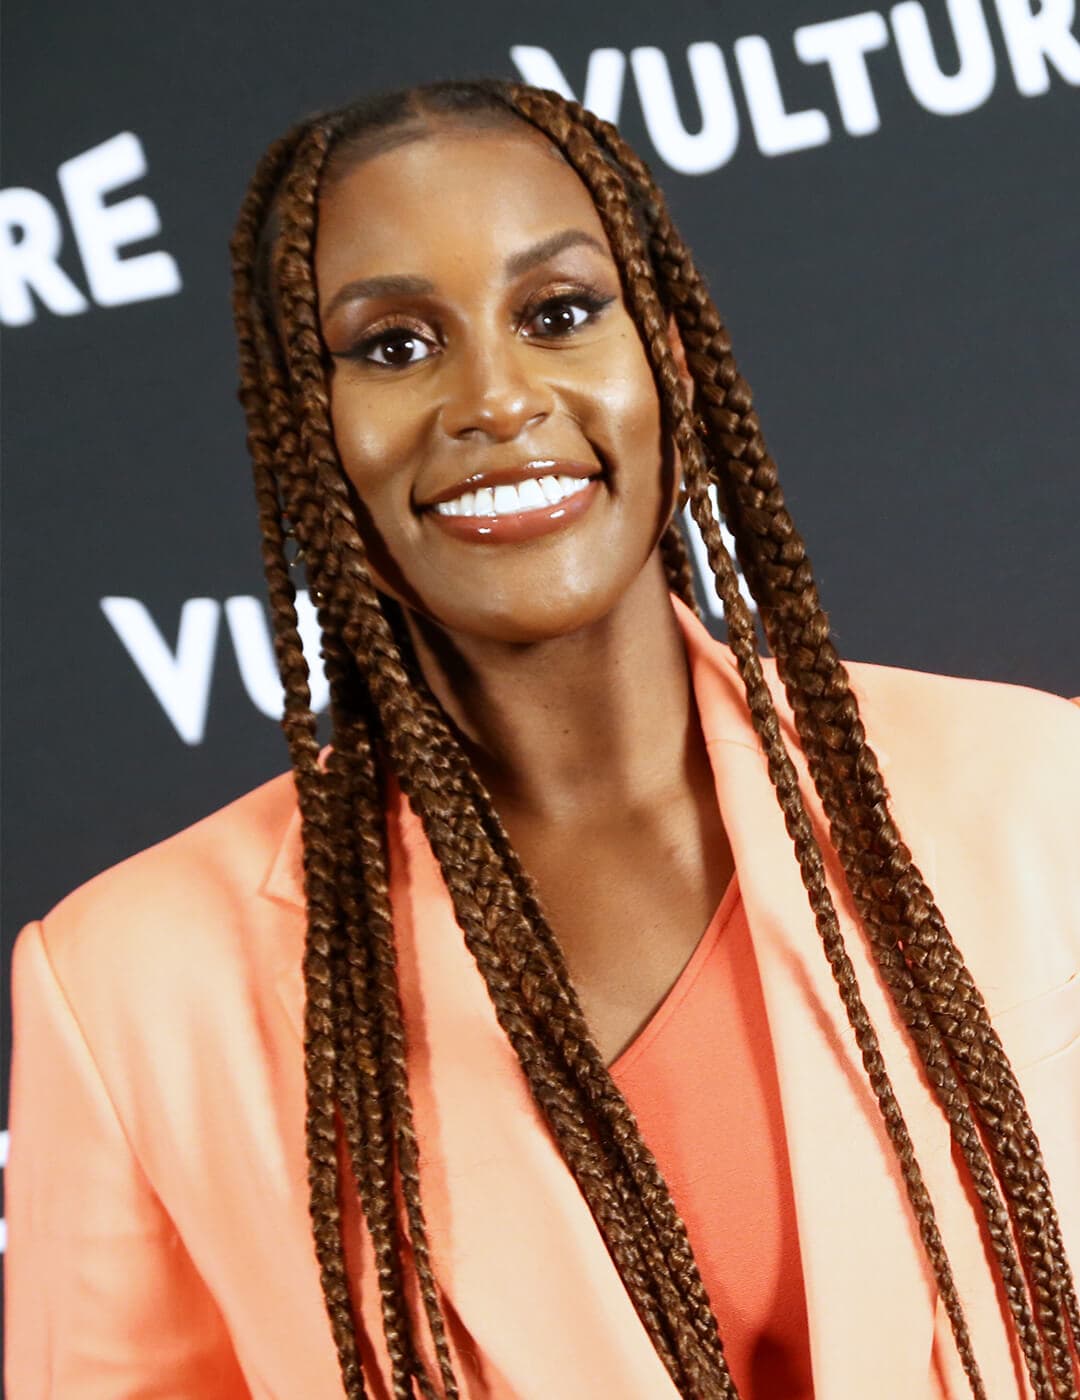 Smiling Issa Rae rocking long, braided hairstyle and orange suit on the red carpet